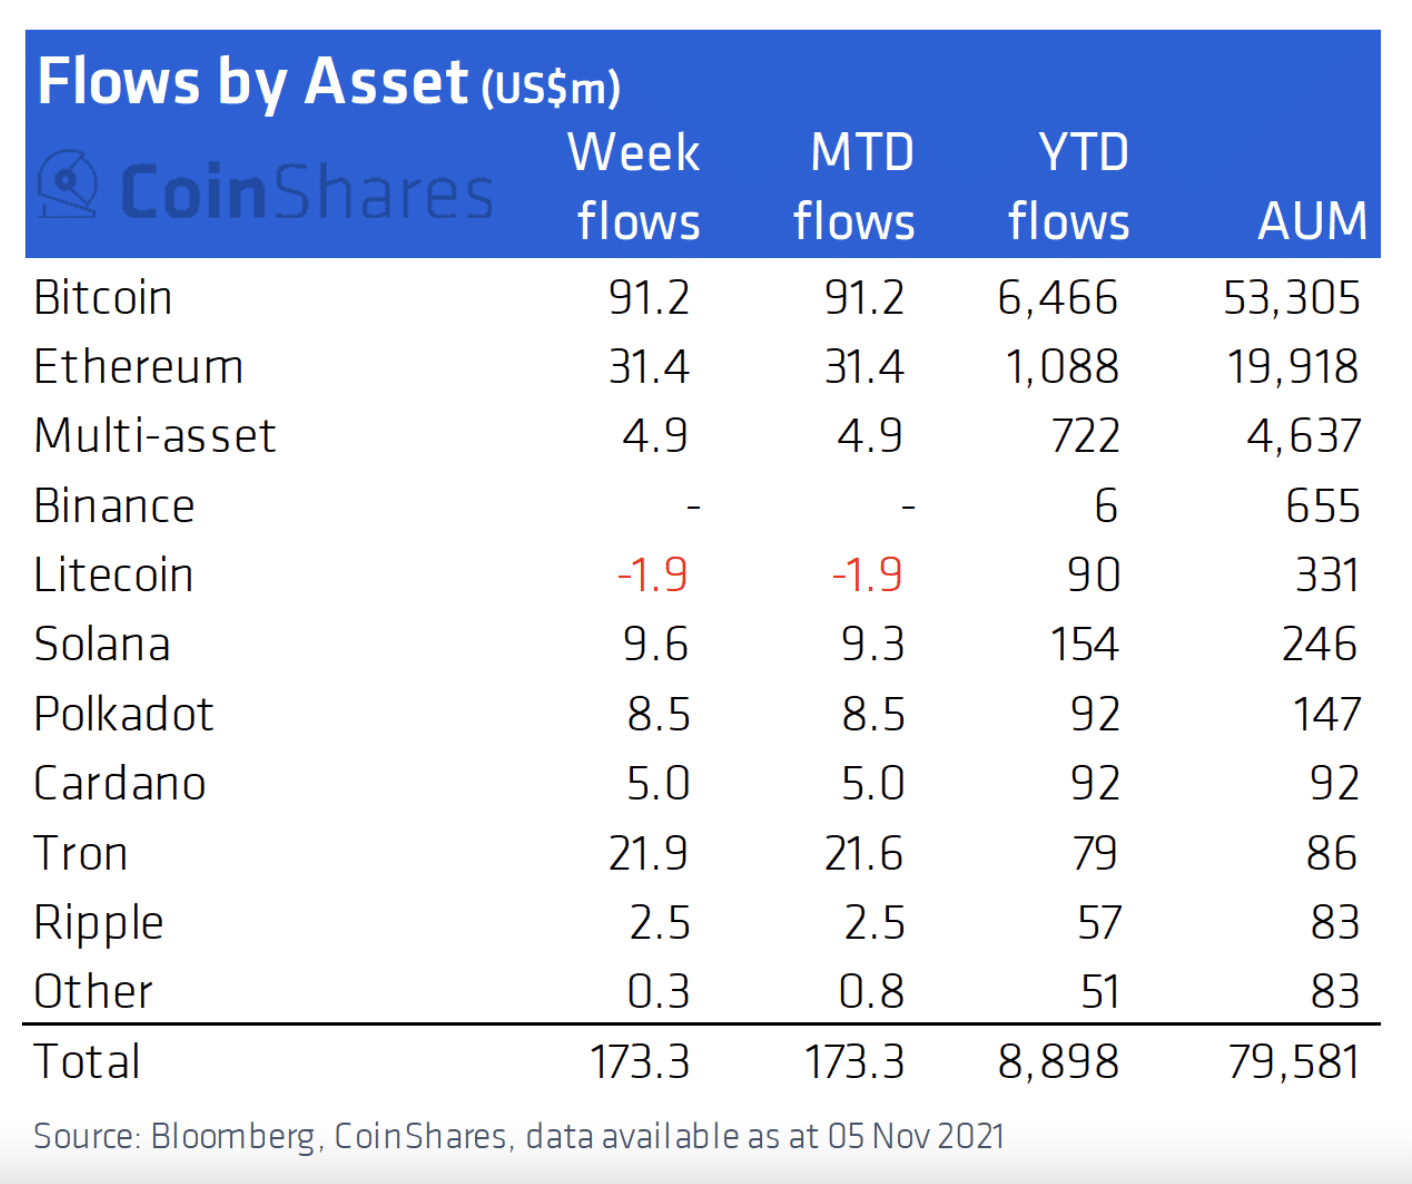 crypto fund inflows - weekly flows by crypto assets week 42 2021